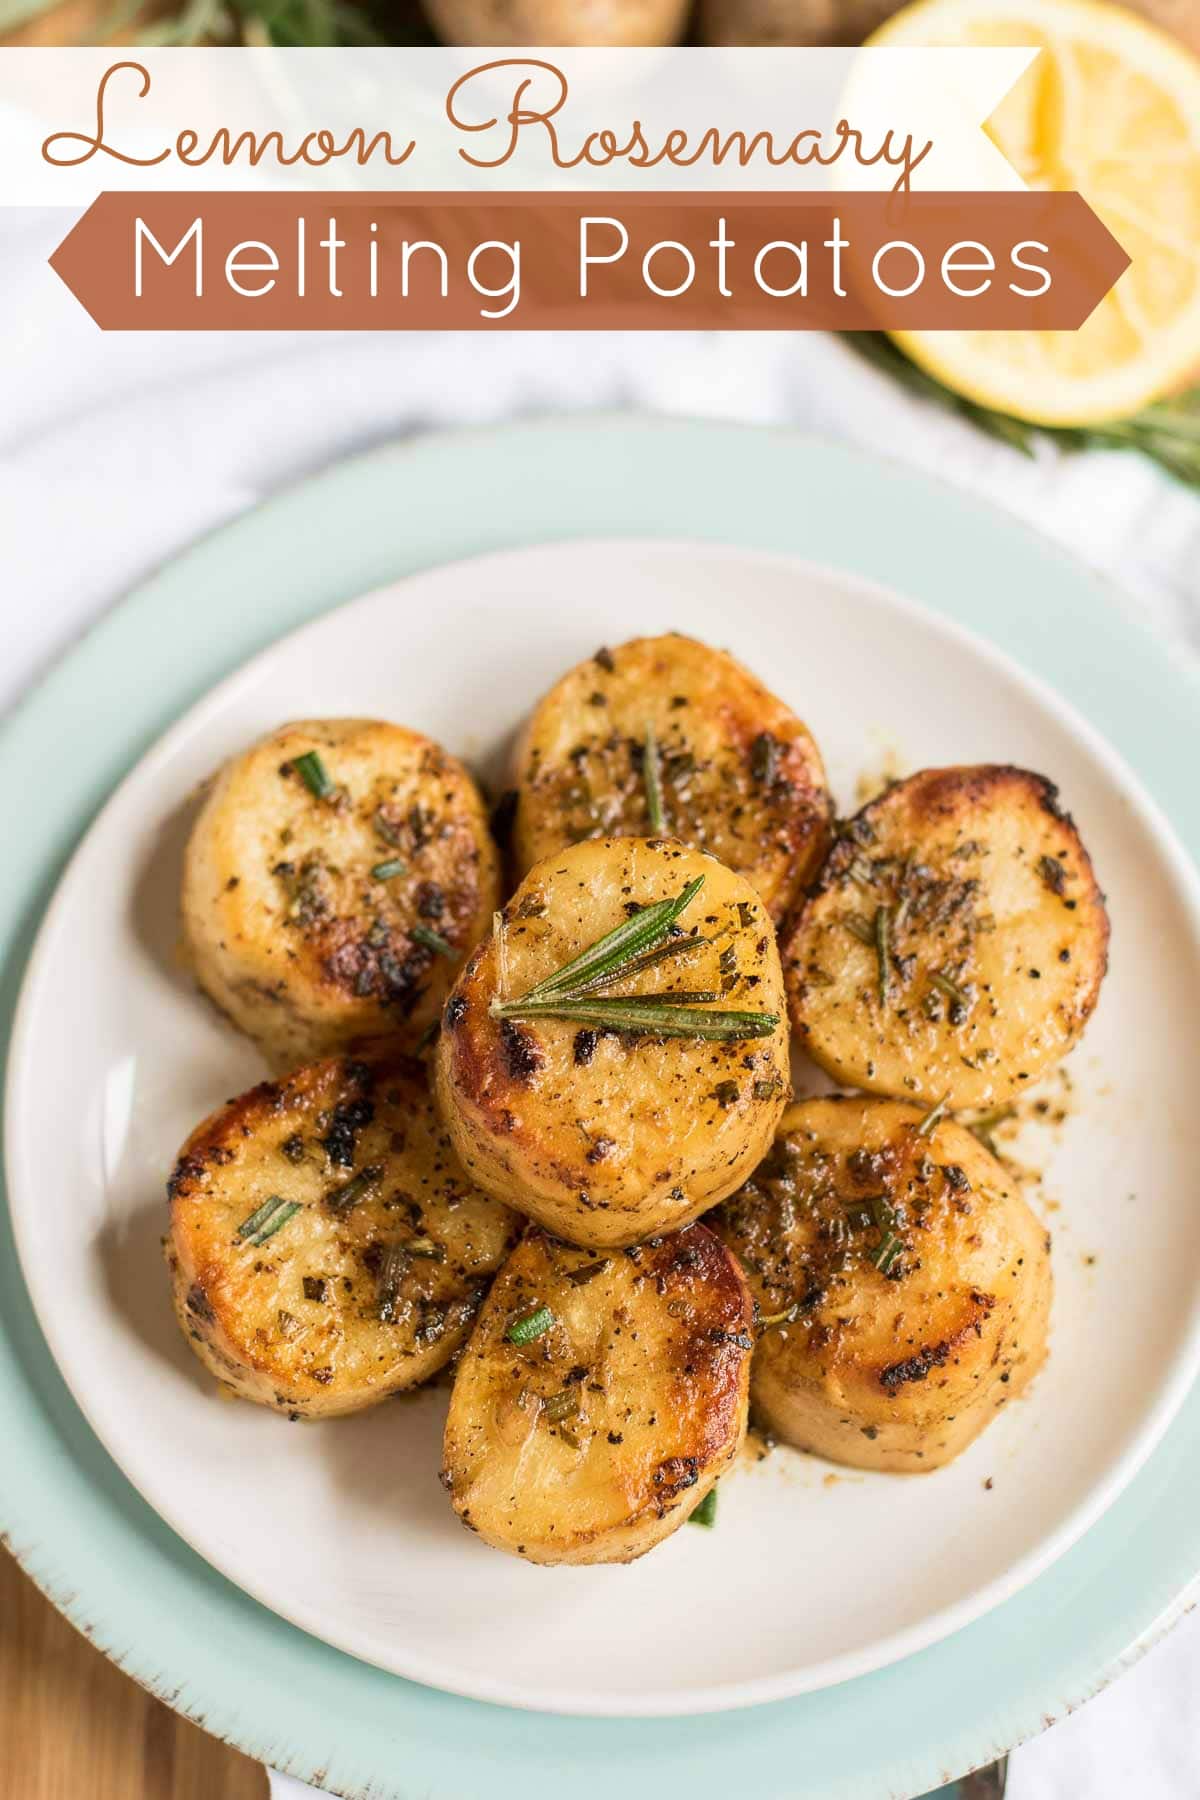 These Lemon Rosemary Melting Potatoes get their name from their crispy outsides and tender, melt in your mouth centers!